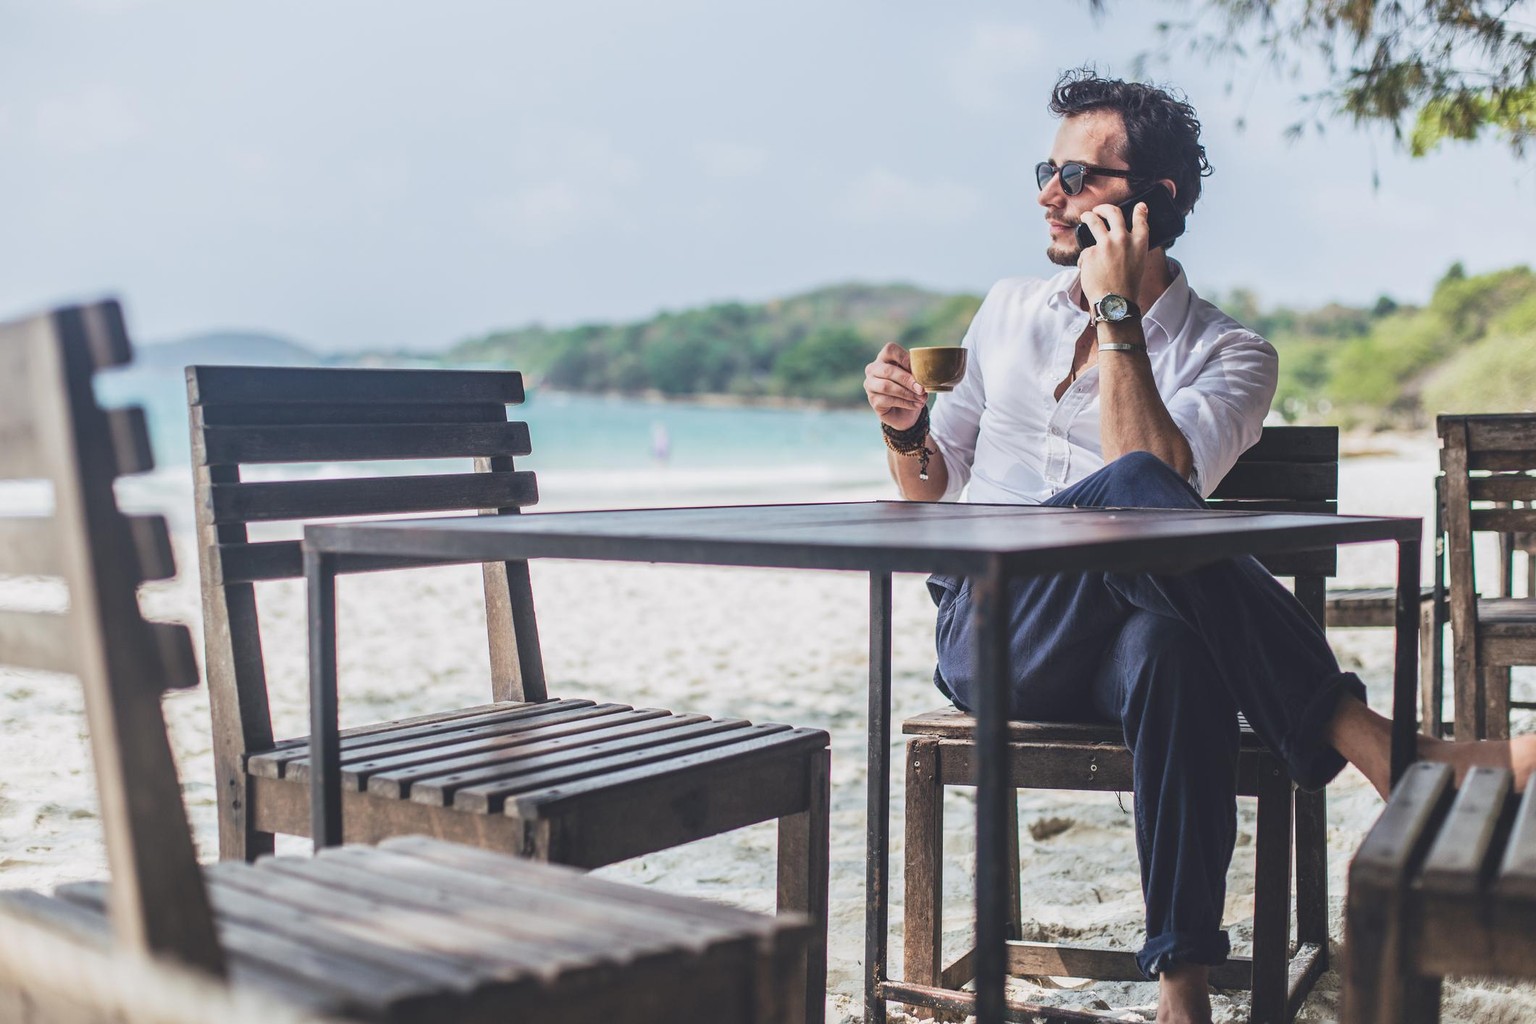 One man, man on the beach, drinking coffee in cafe, talking on mobile phone.